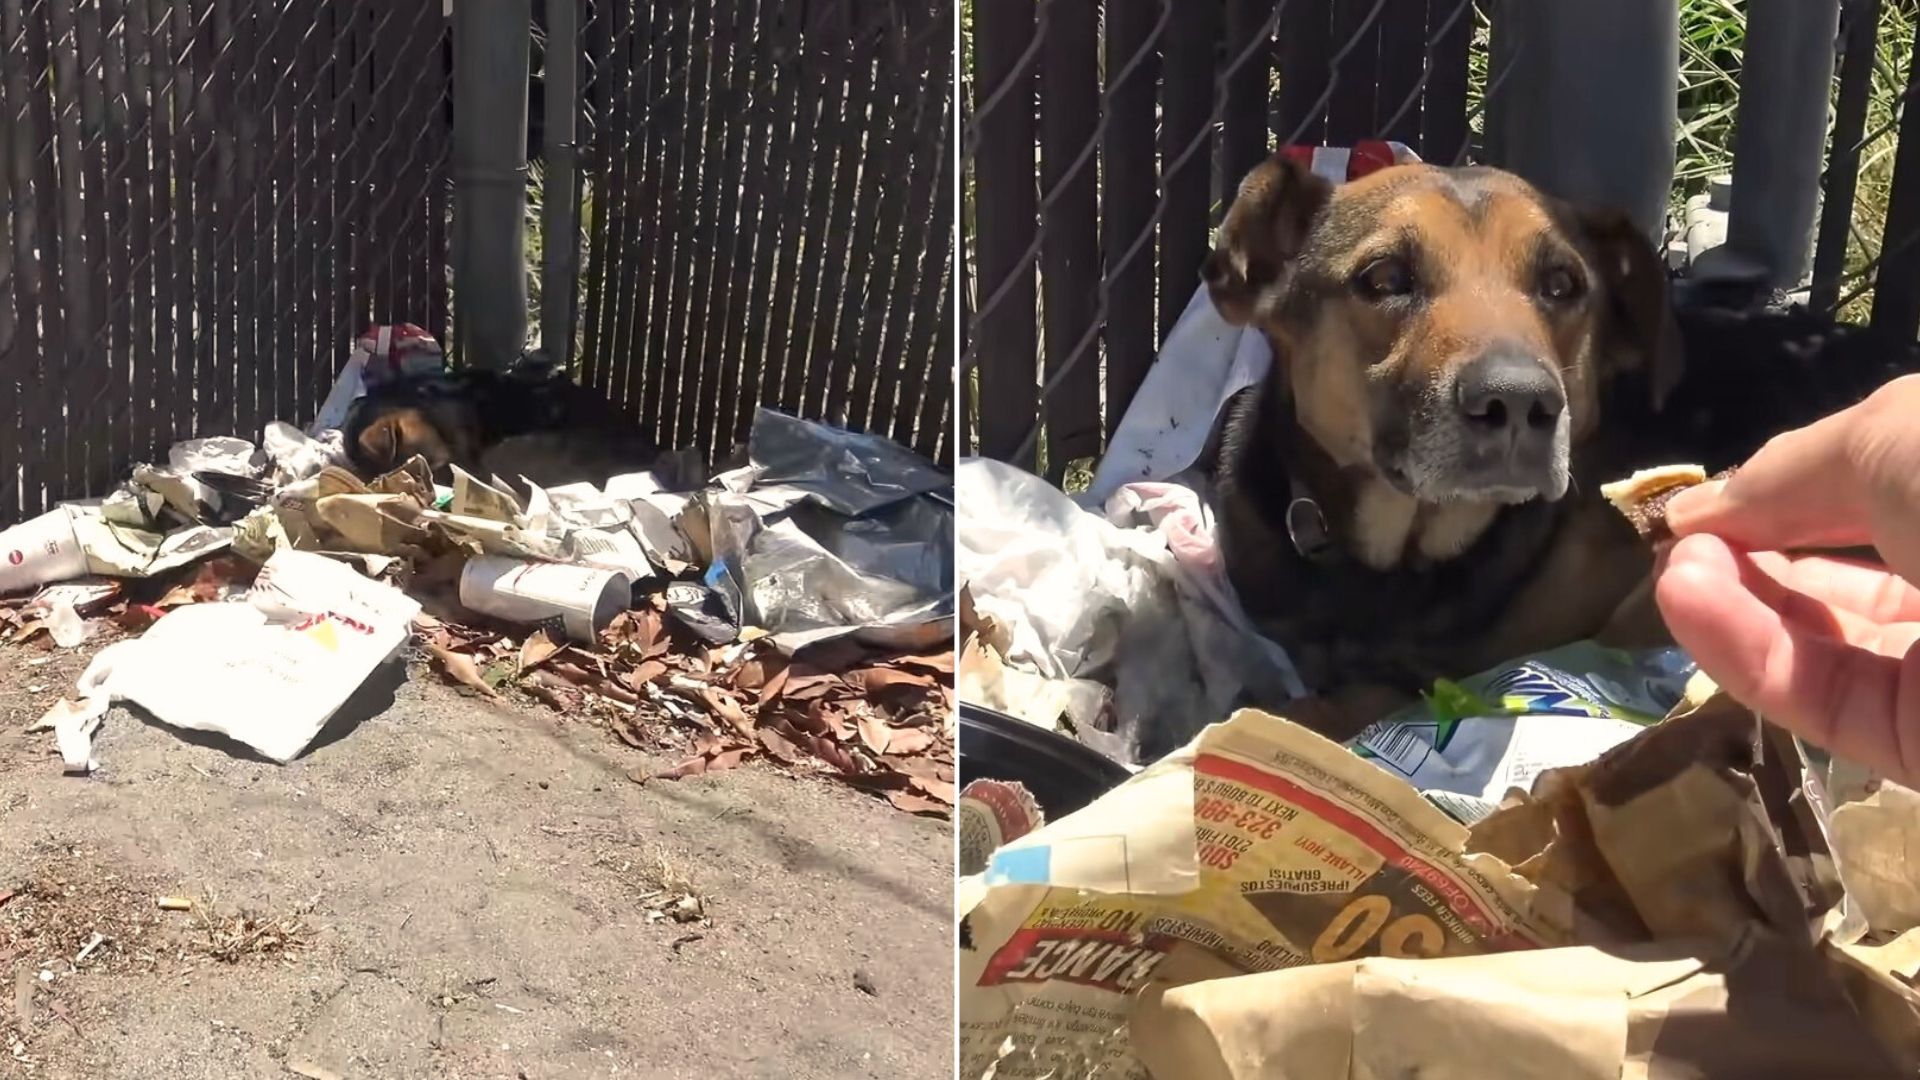 Man Alarmed By Disturbing Discovery Of A Dog Laying On A Pile Of Trash